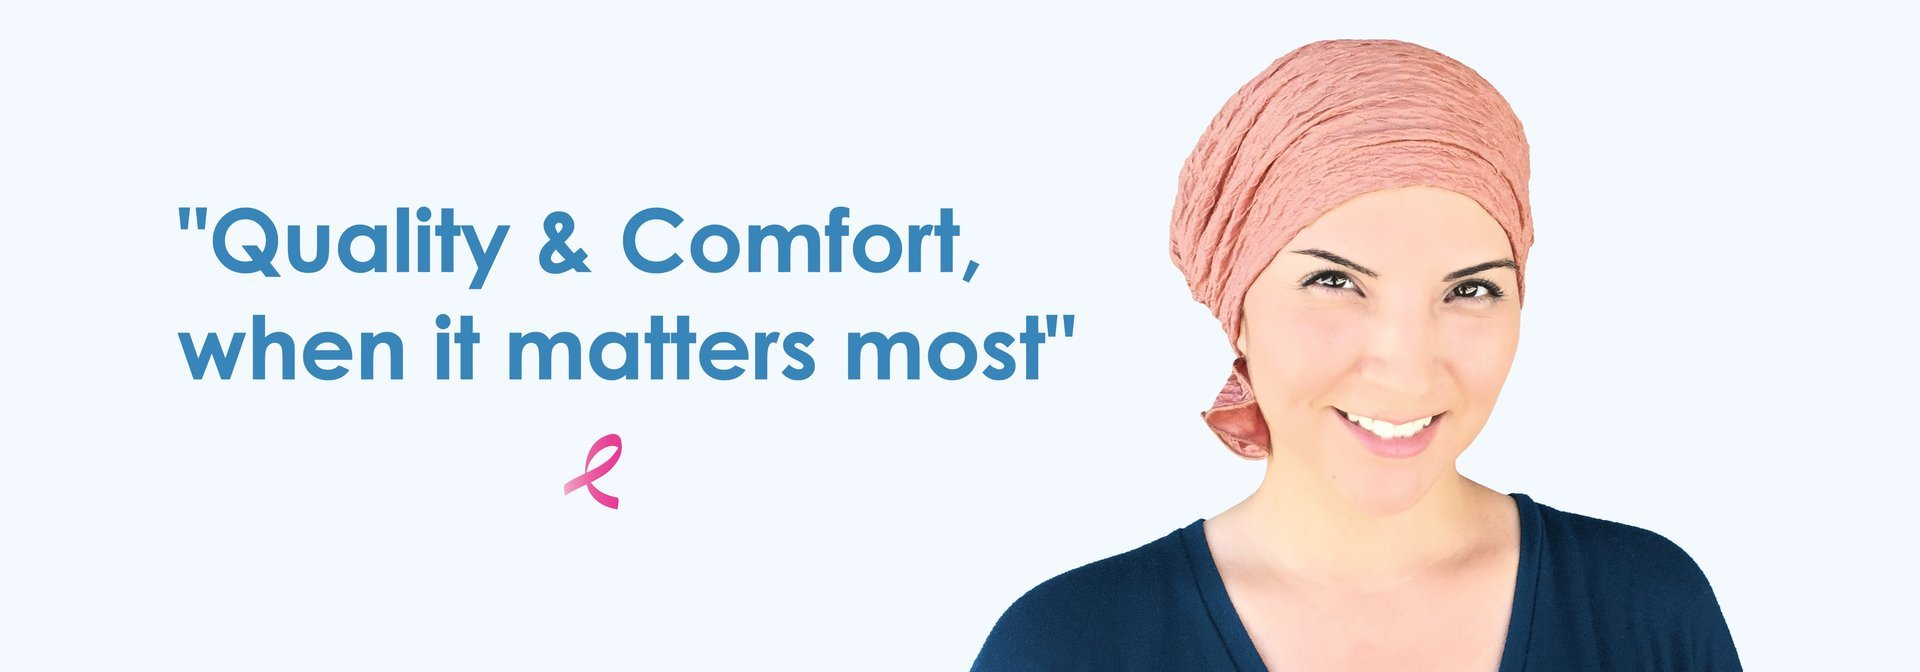 Quality and Comfort, when it matters most.